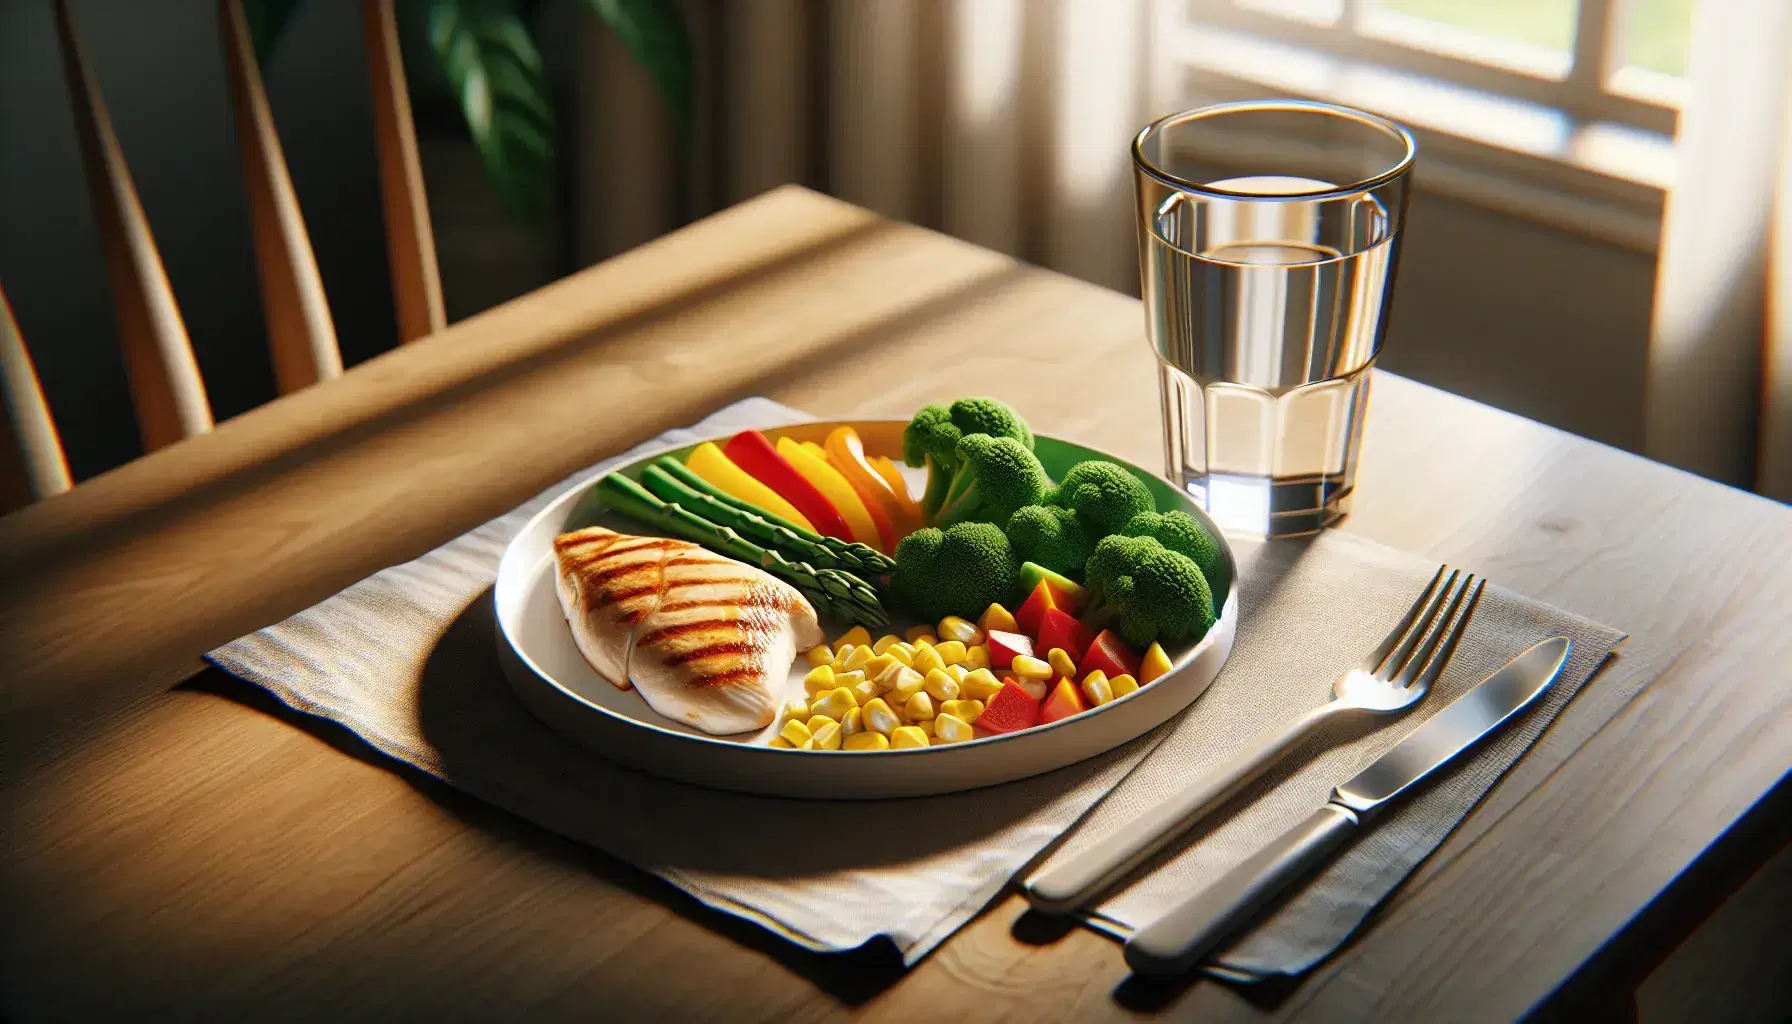 Round plate with balanced meal: green broccoli, red peppers, yellow corn kernels and grilled chicken breast, with glass of water and cutlery.